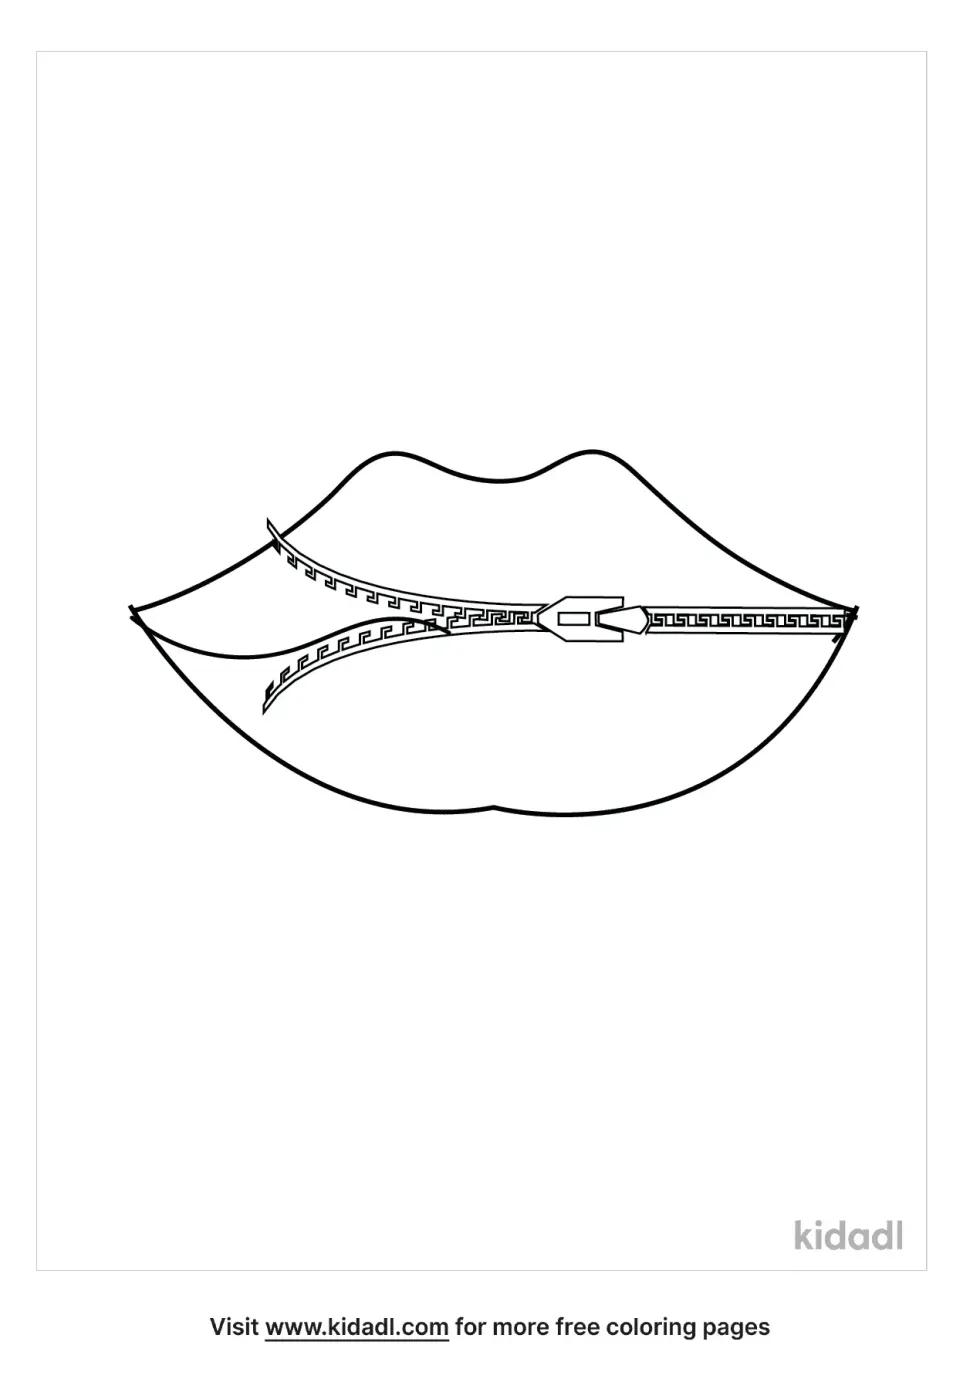 Lips With A Zipper Coloring Page